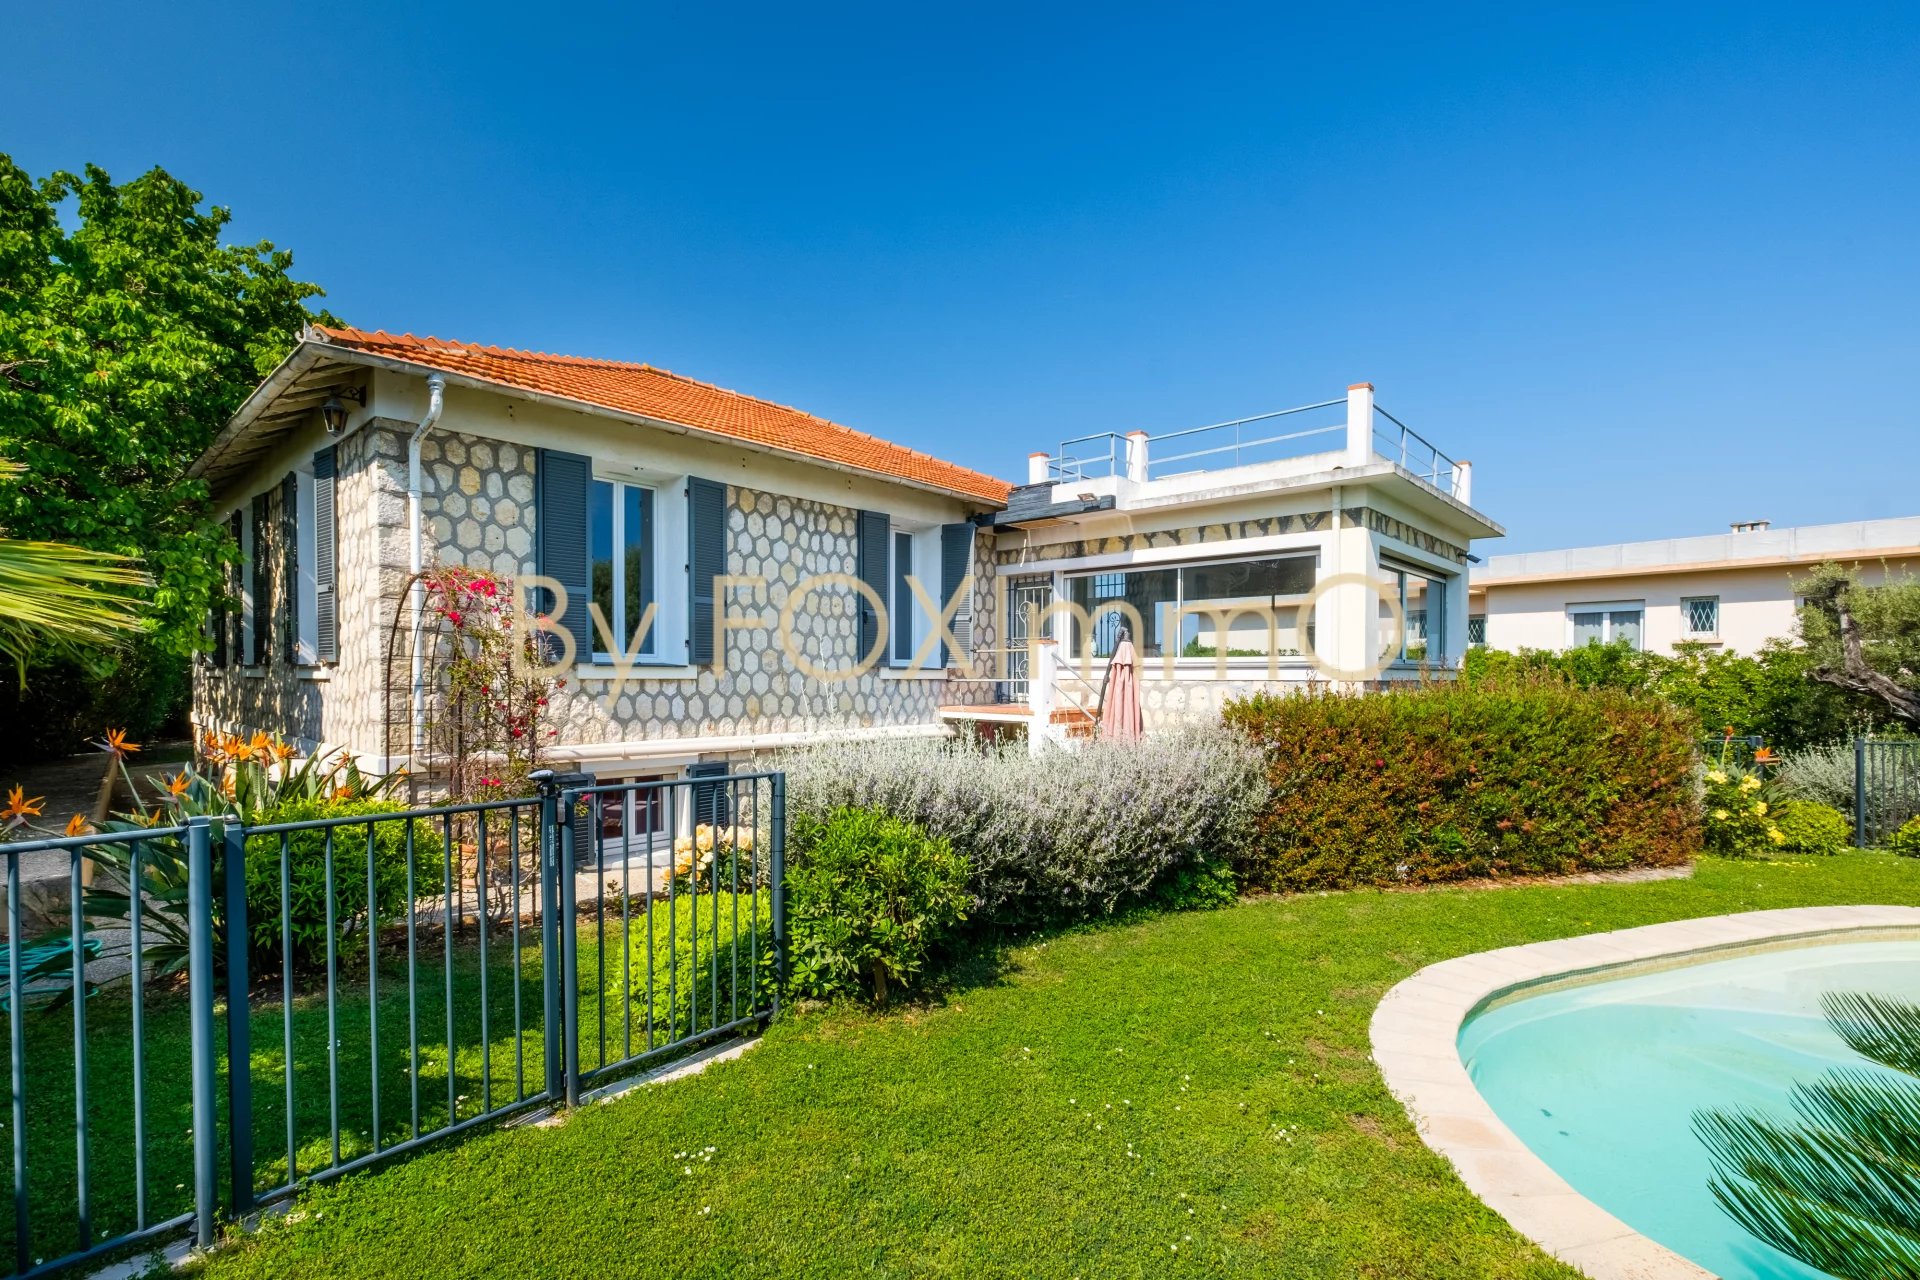 in Antibes, there is a beautiful villa of over 200m², located in a completely peaceful environment, with a swimming pool and views of the sea and mountains